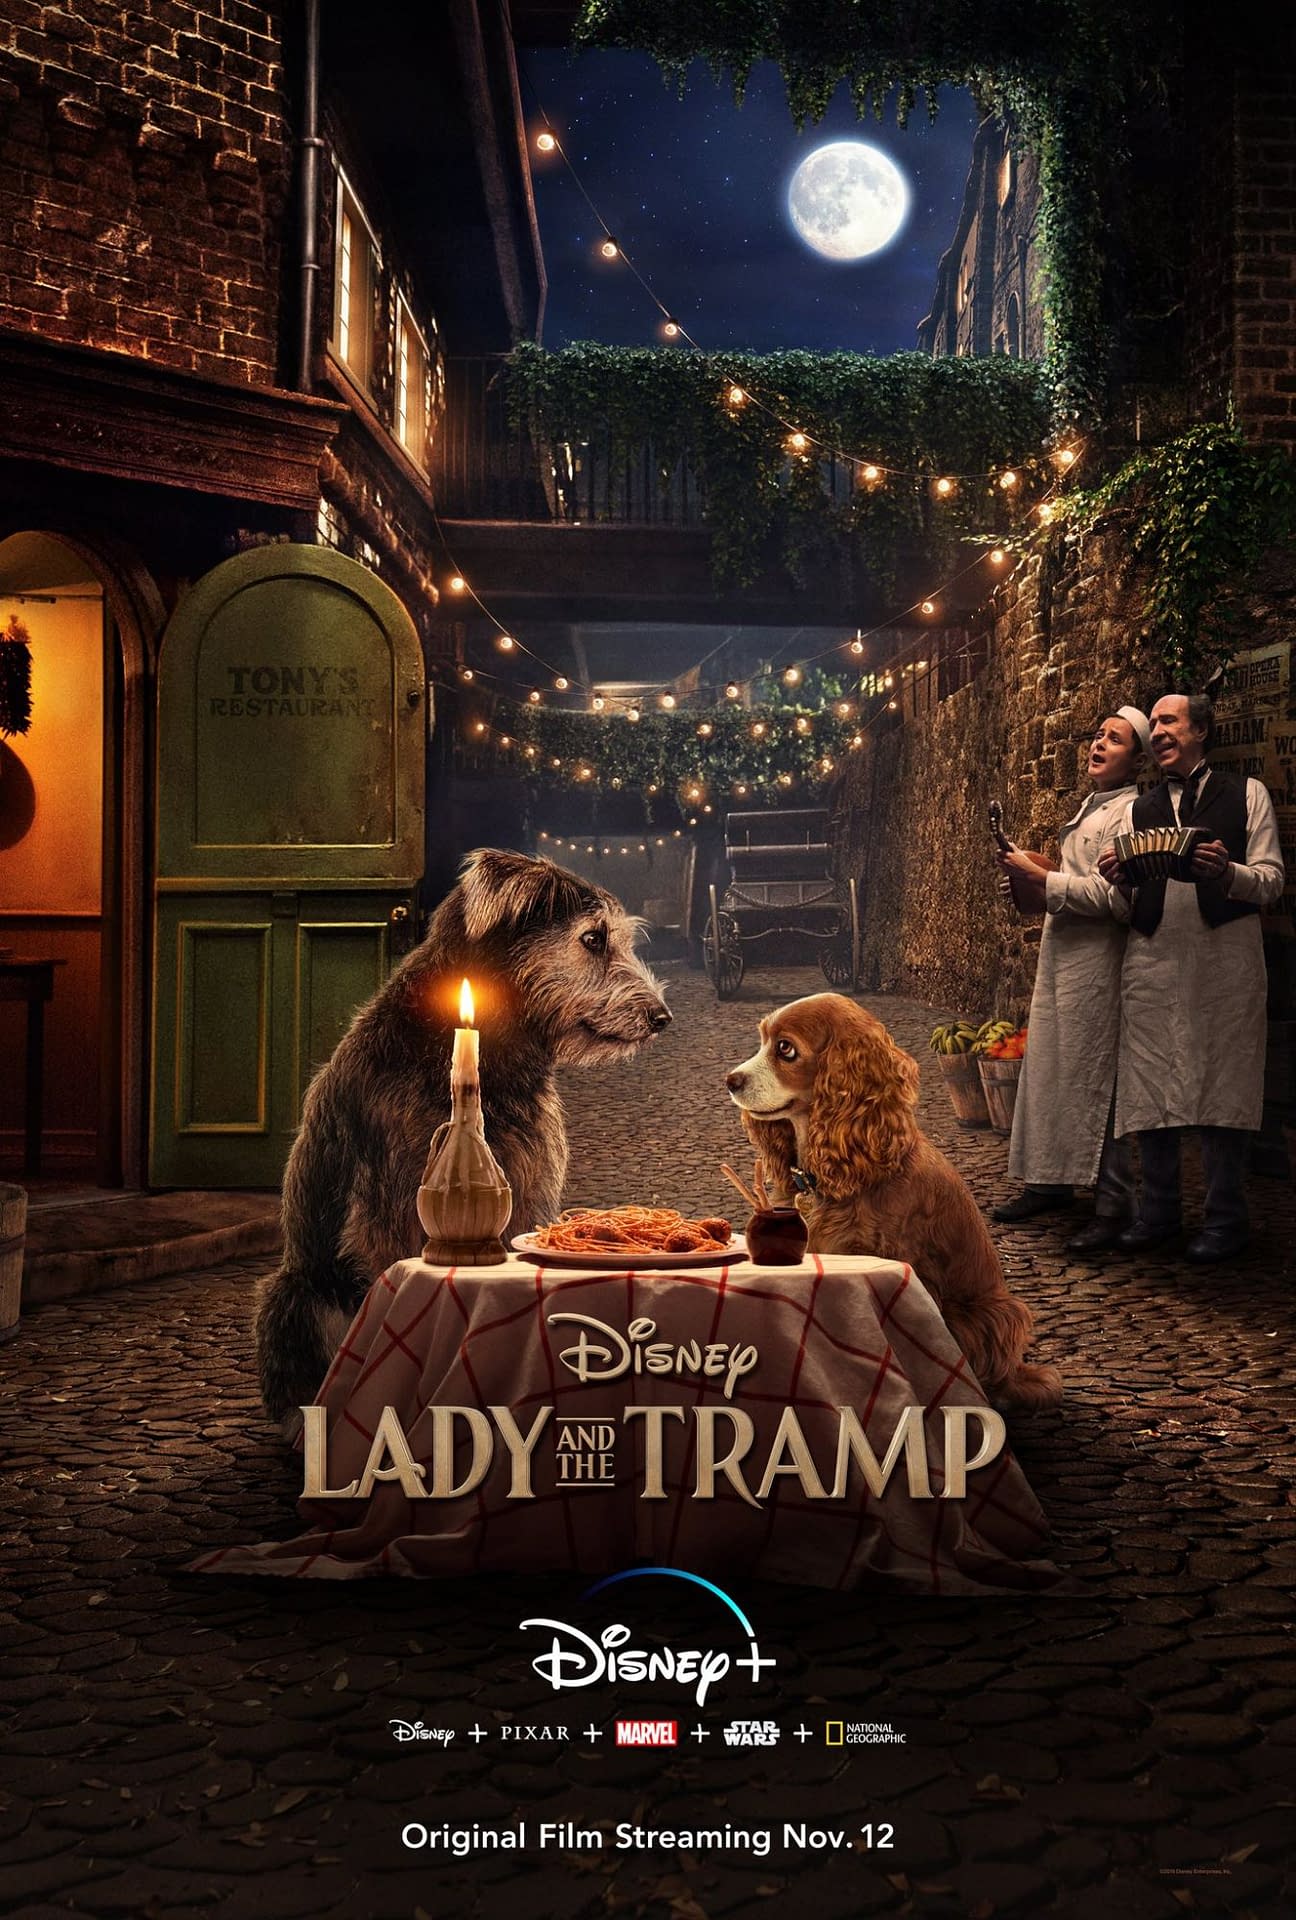 Disney Releases the Poster for the Disney+ Remake of "Lady and the Tramp"